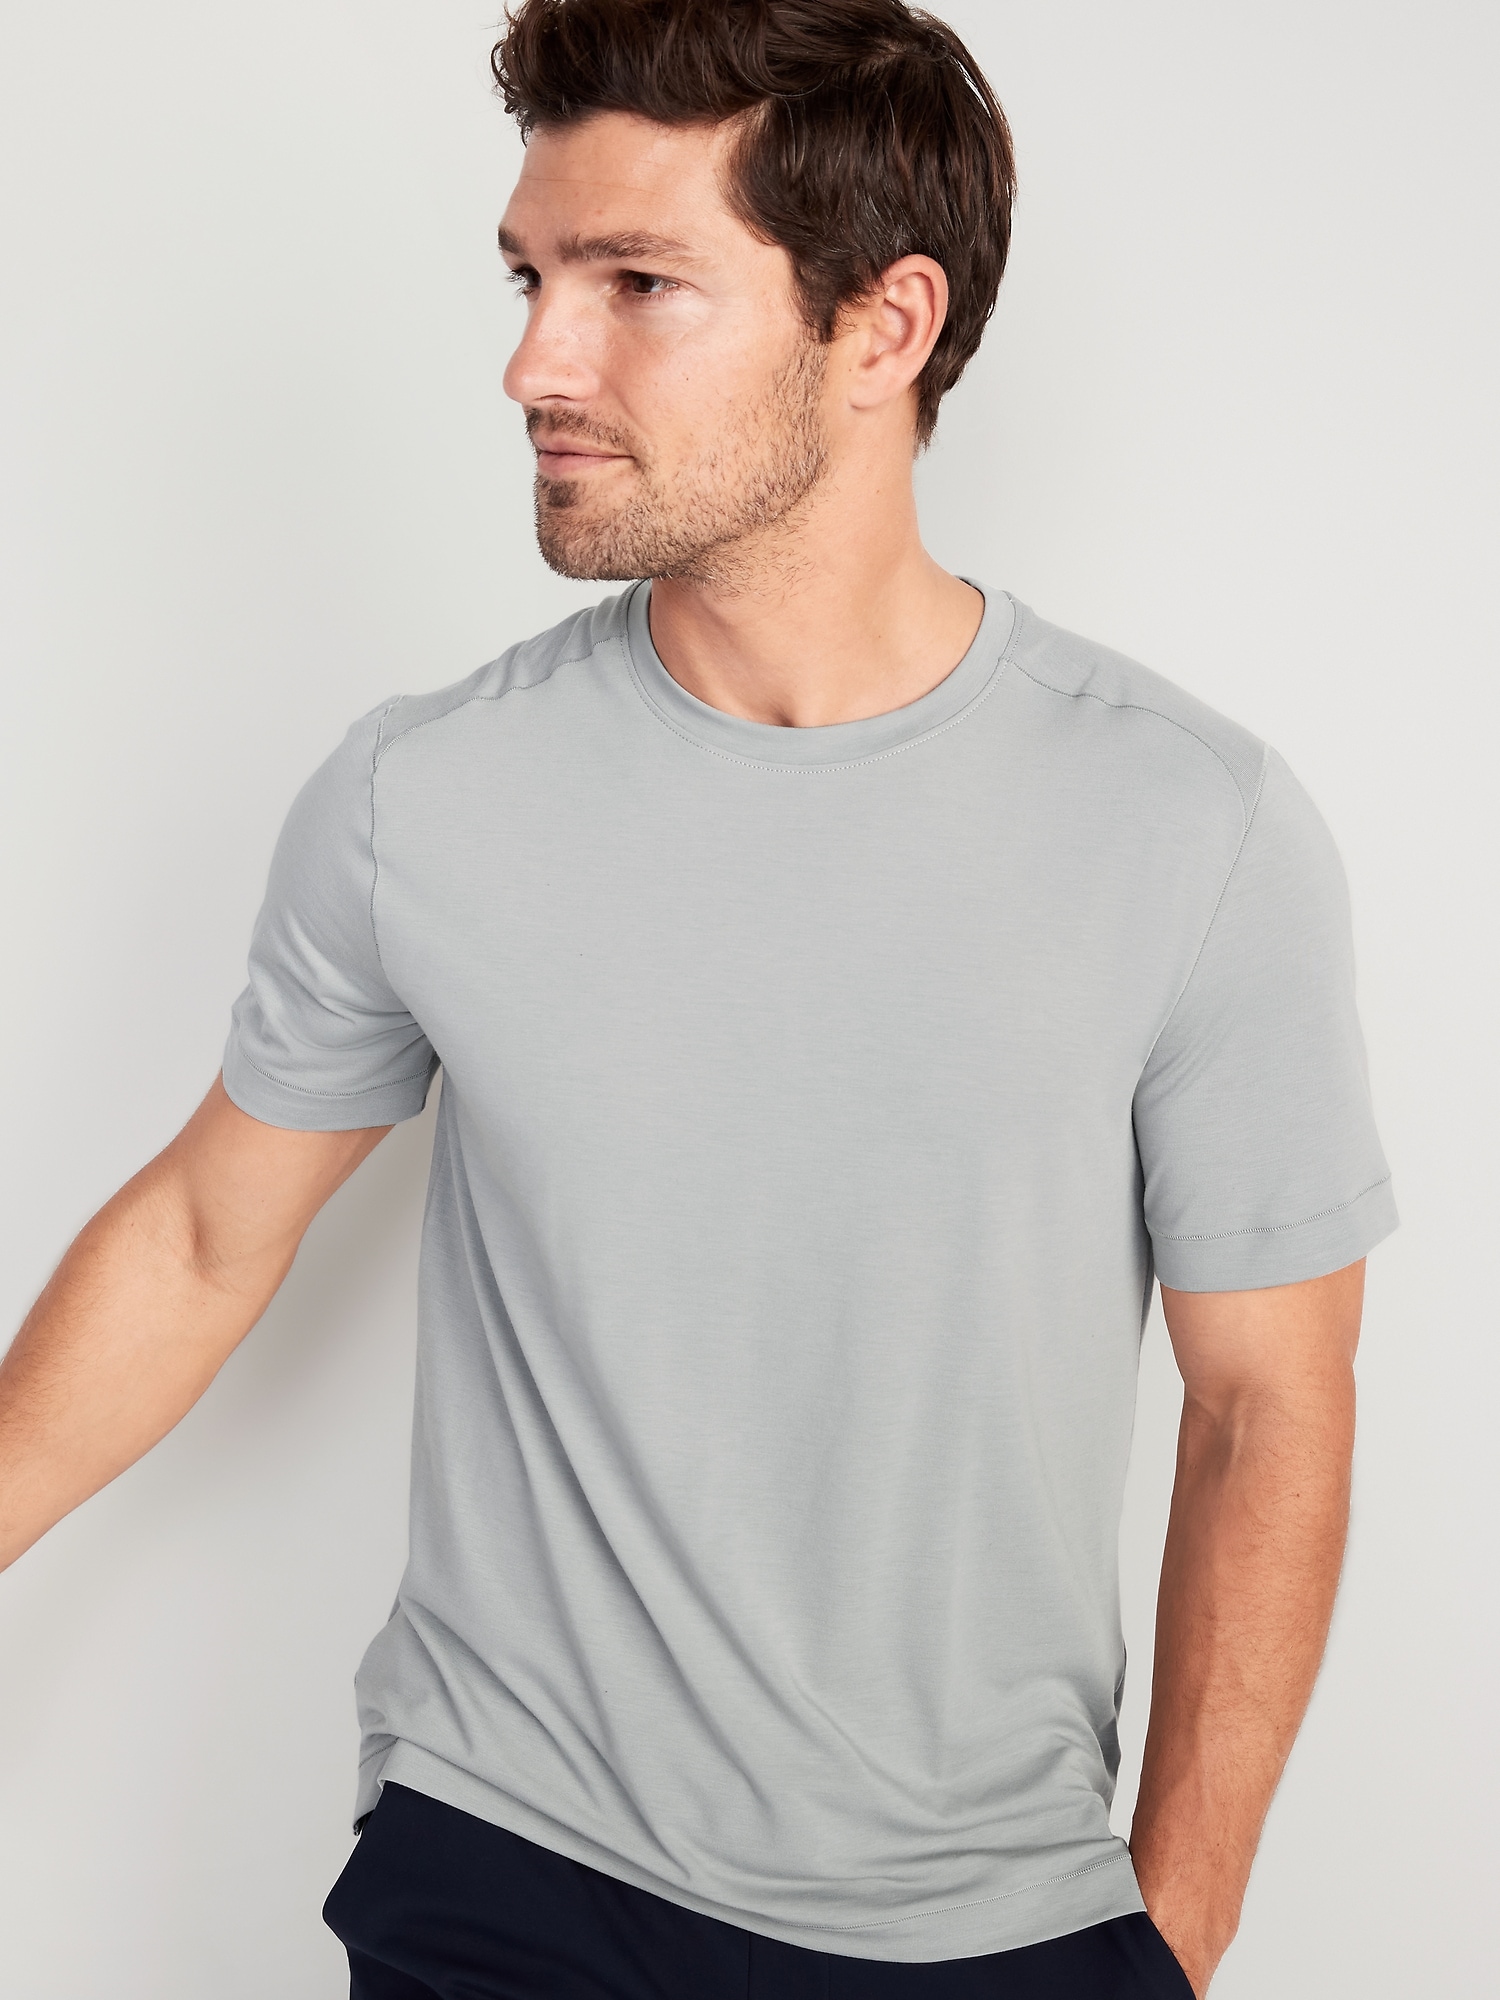 Old Navy Beyond 4-Way Stretch T-Shirt for Men silver. 1